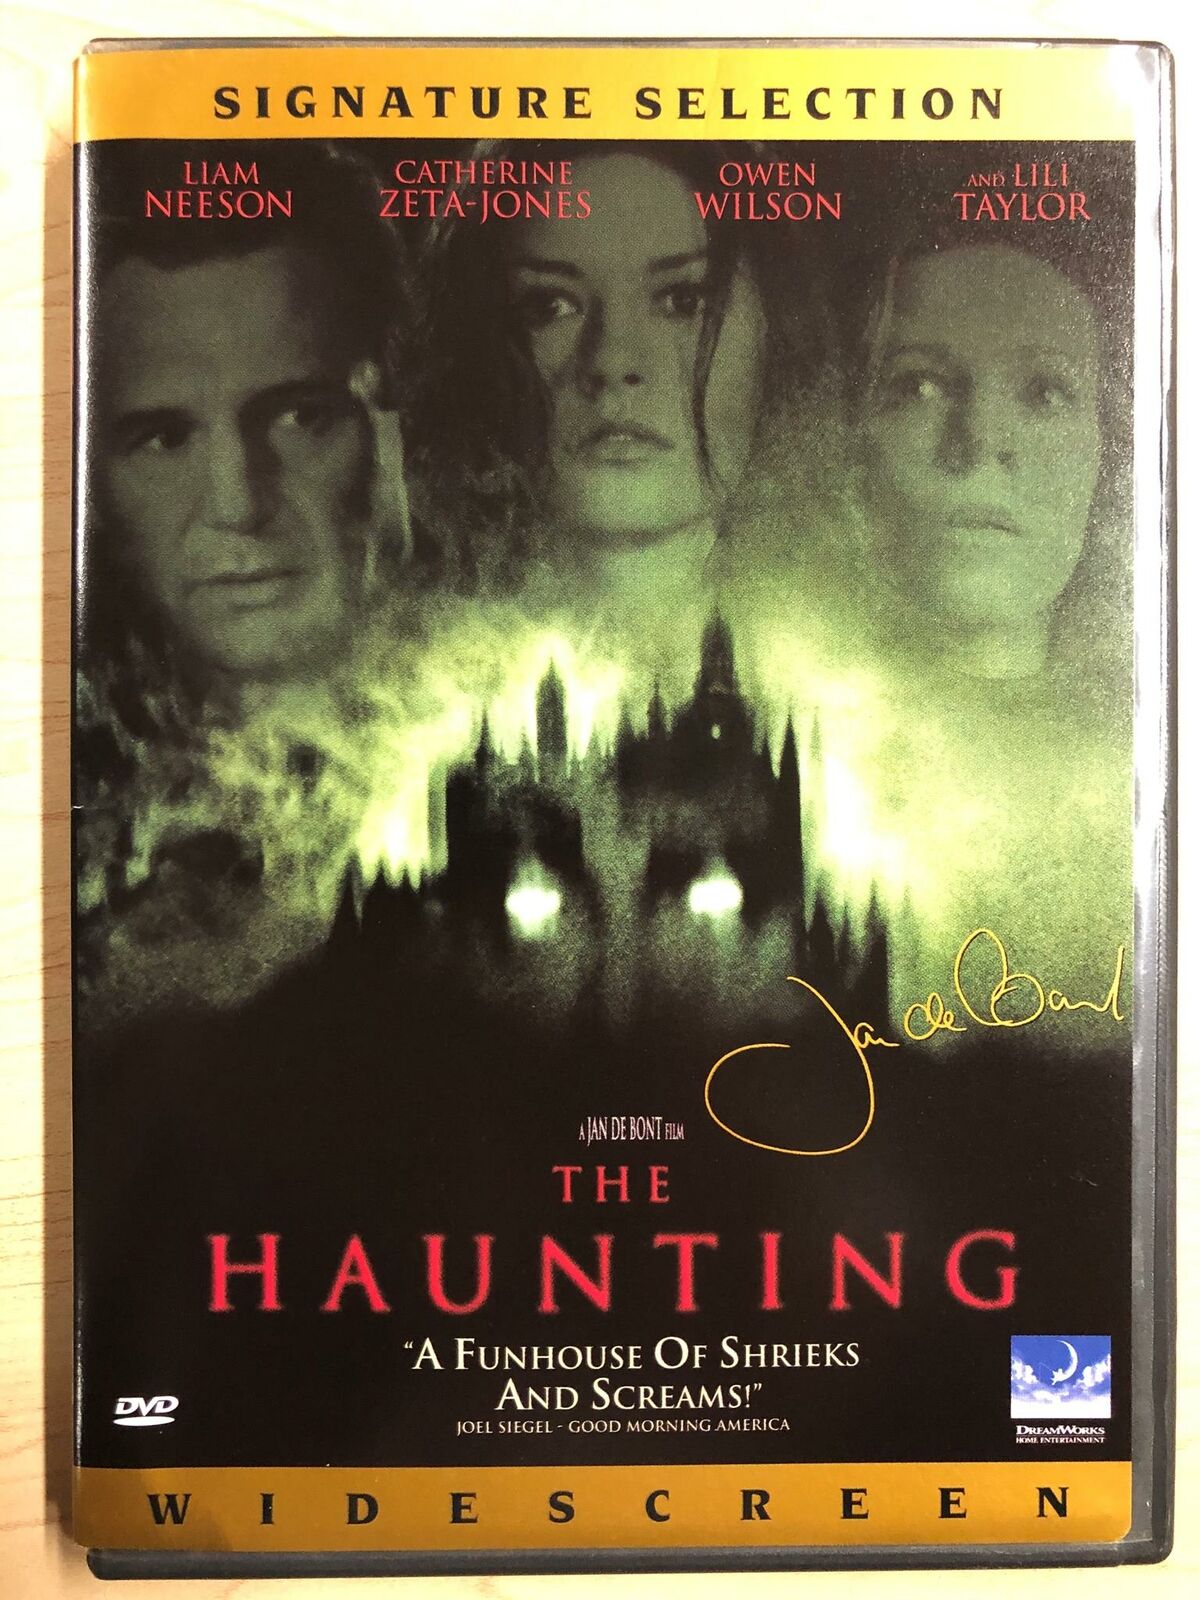 The Haunting (DVD, 1999, Widescreen Signature Selection) - J1231